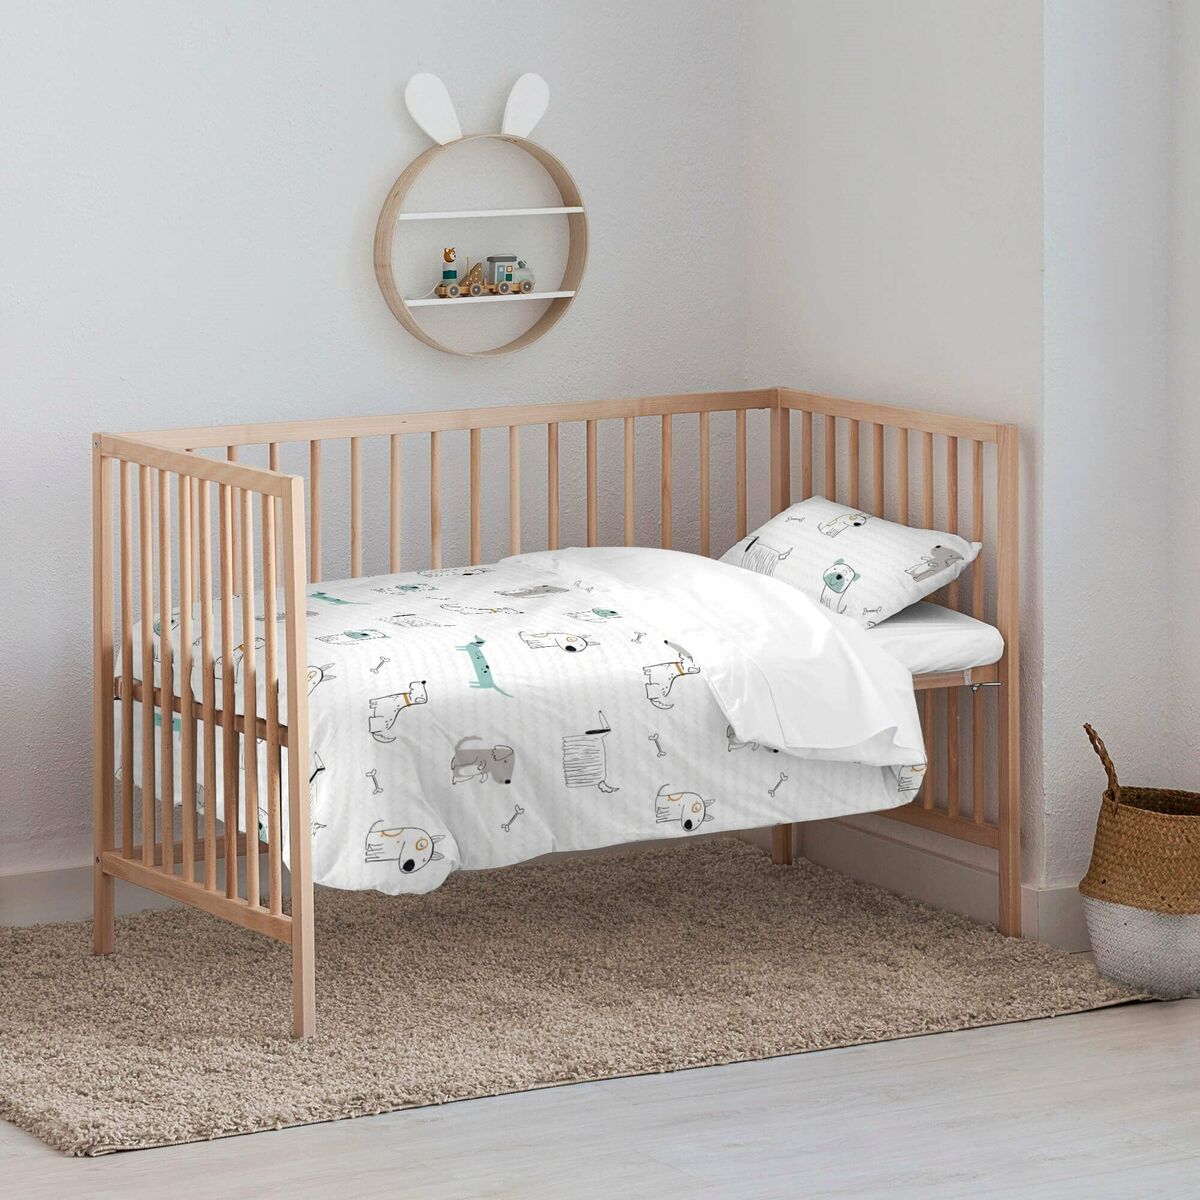 Cot Quilt Cover Kids&Cotton Huali Small 100 x 120 cm